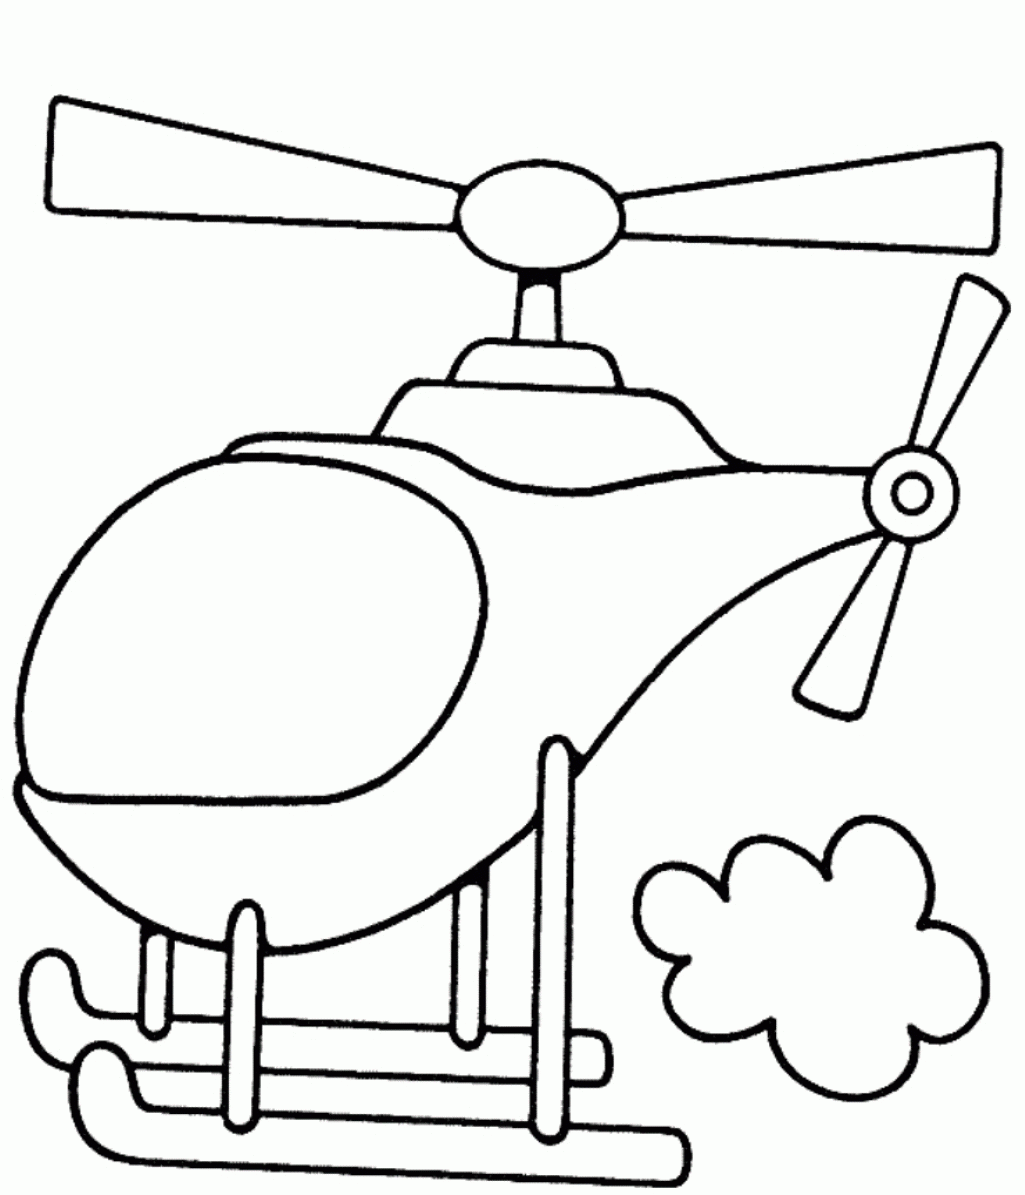 Submarine Coloring Pages To Print - Coloring Home